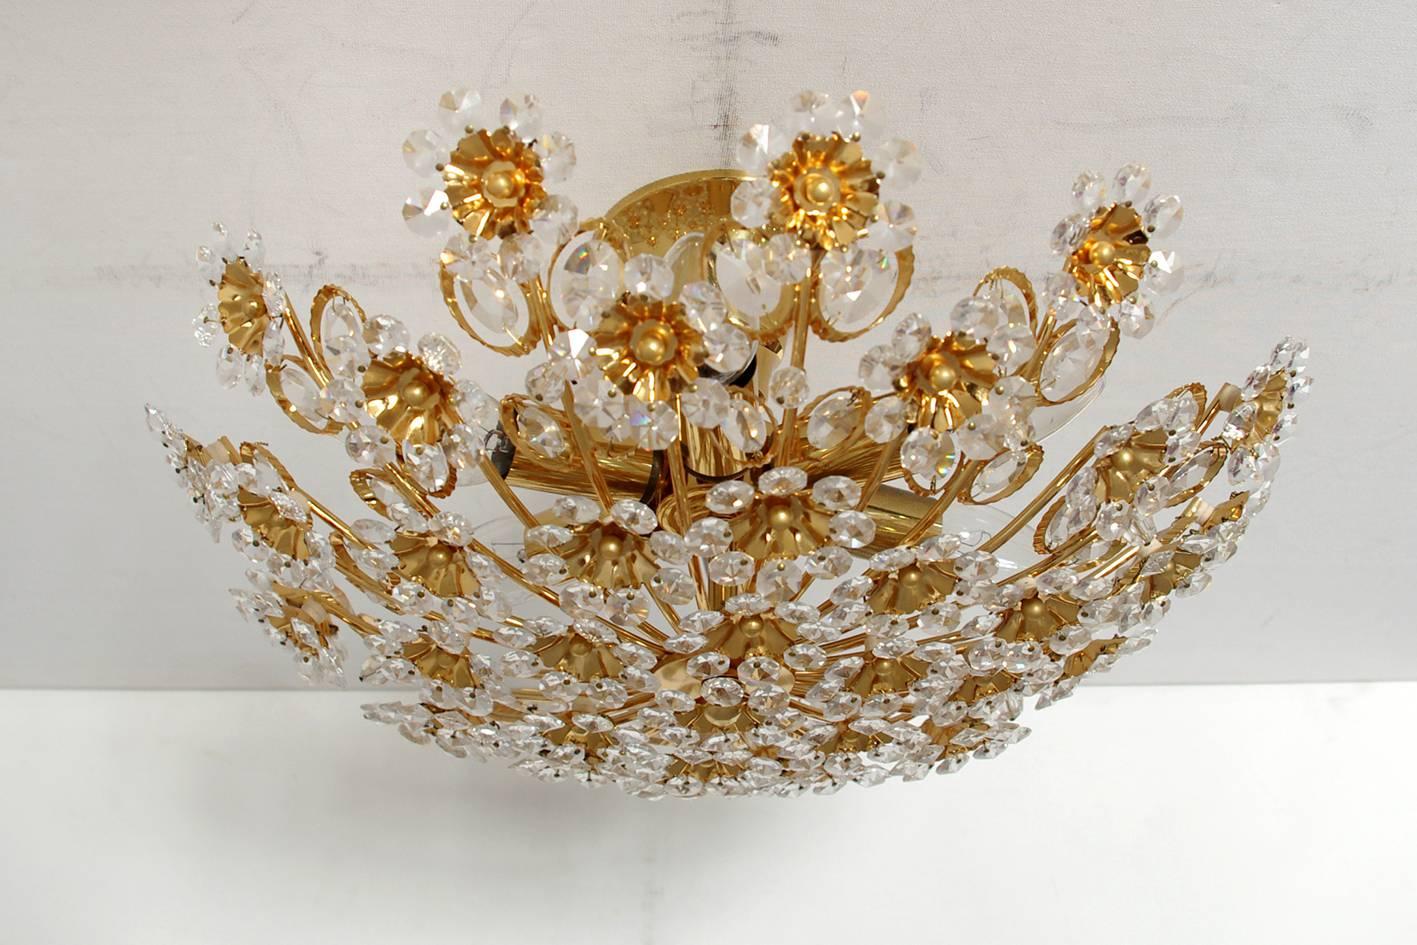 Beautiful Gold-Plated Chandelier Flush Mount by Palwa, 1960s (Mitte des 20. Jahrhunderts)